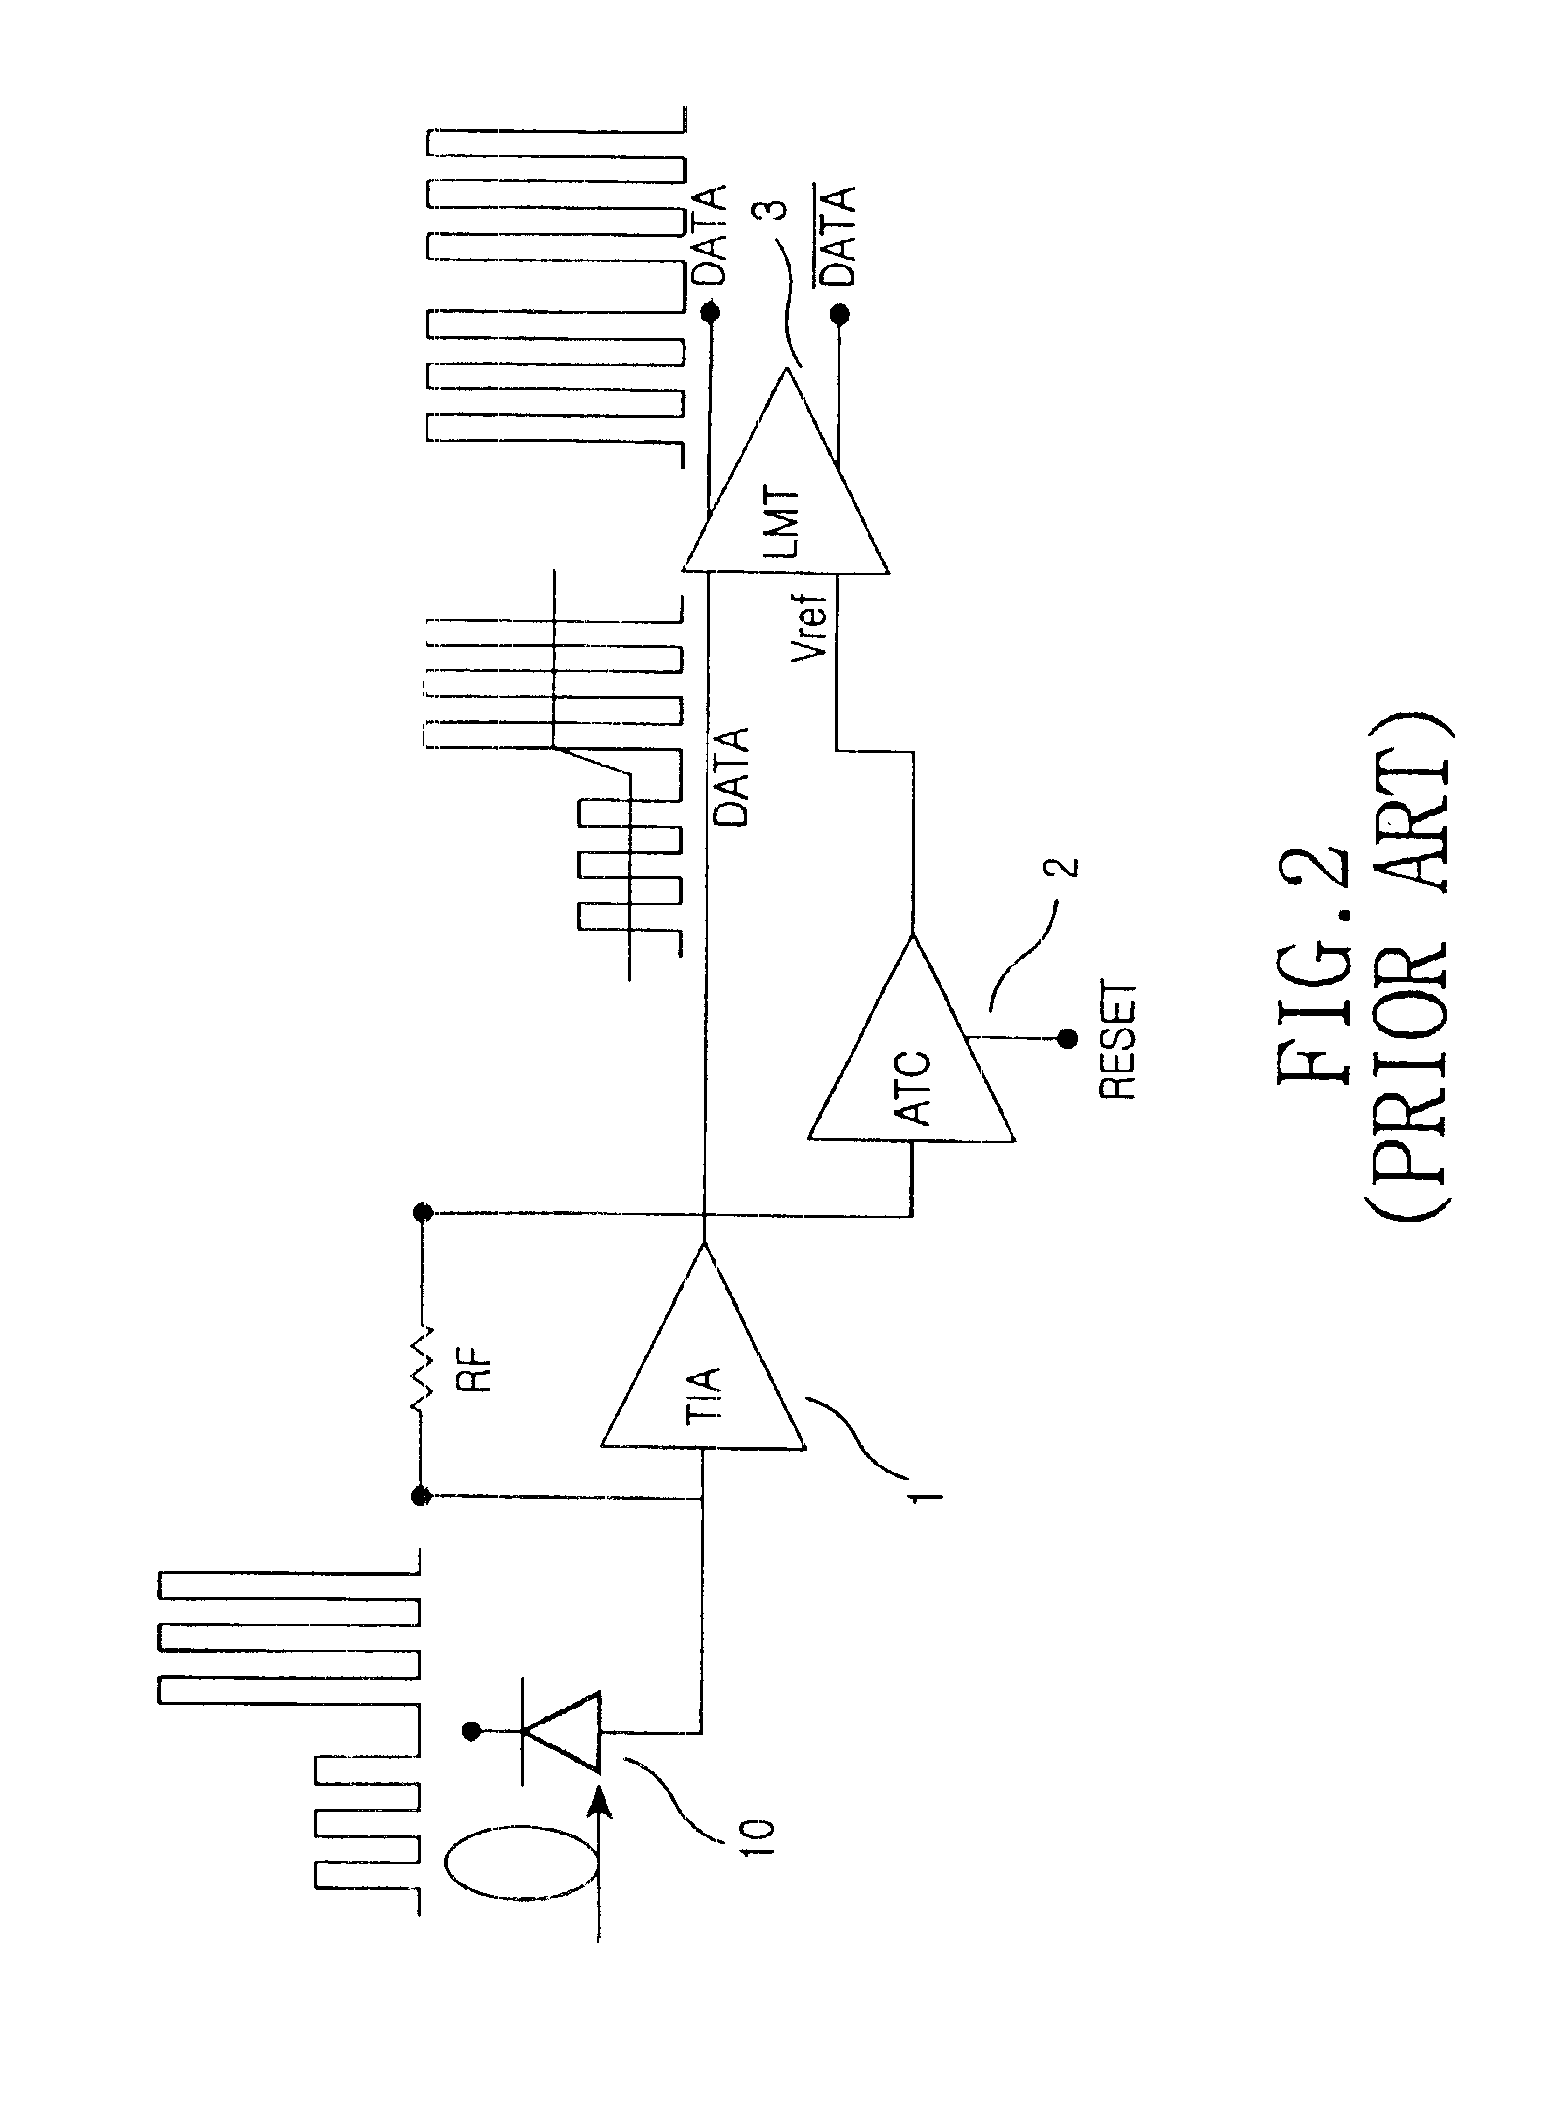 Automatic threshold control device for burst mode optical receiver